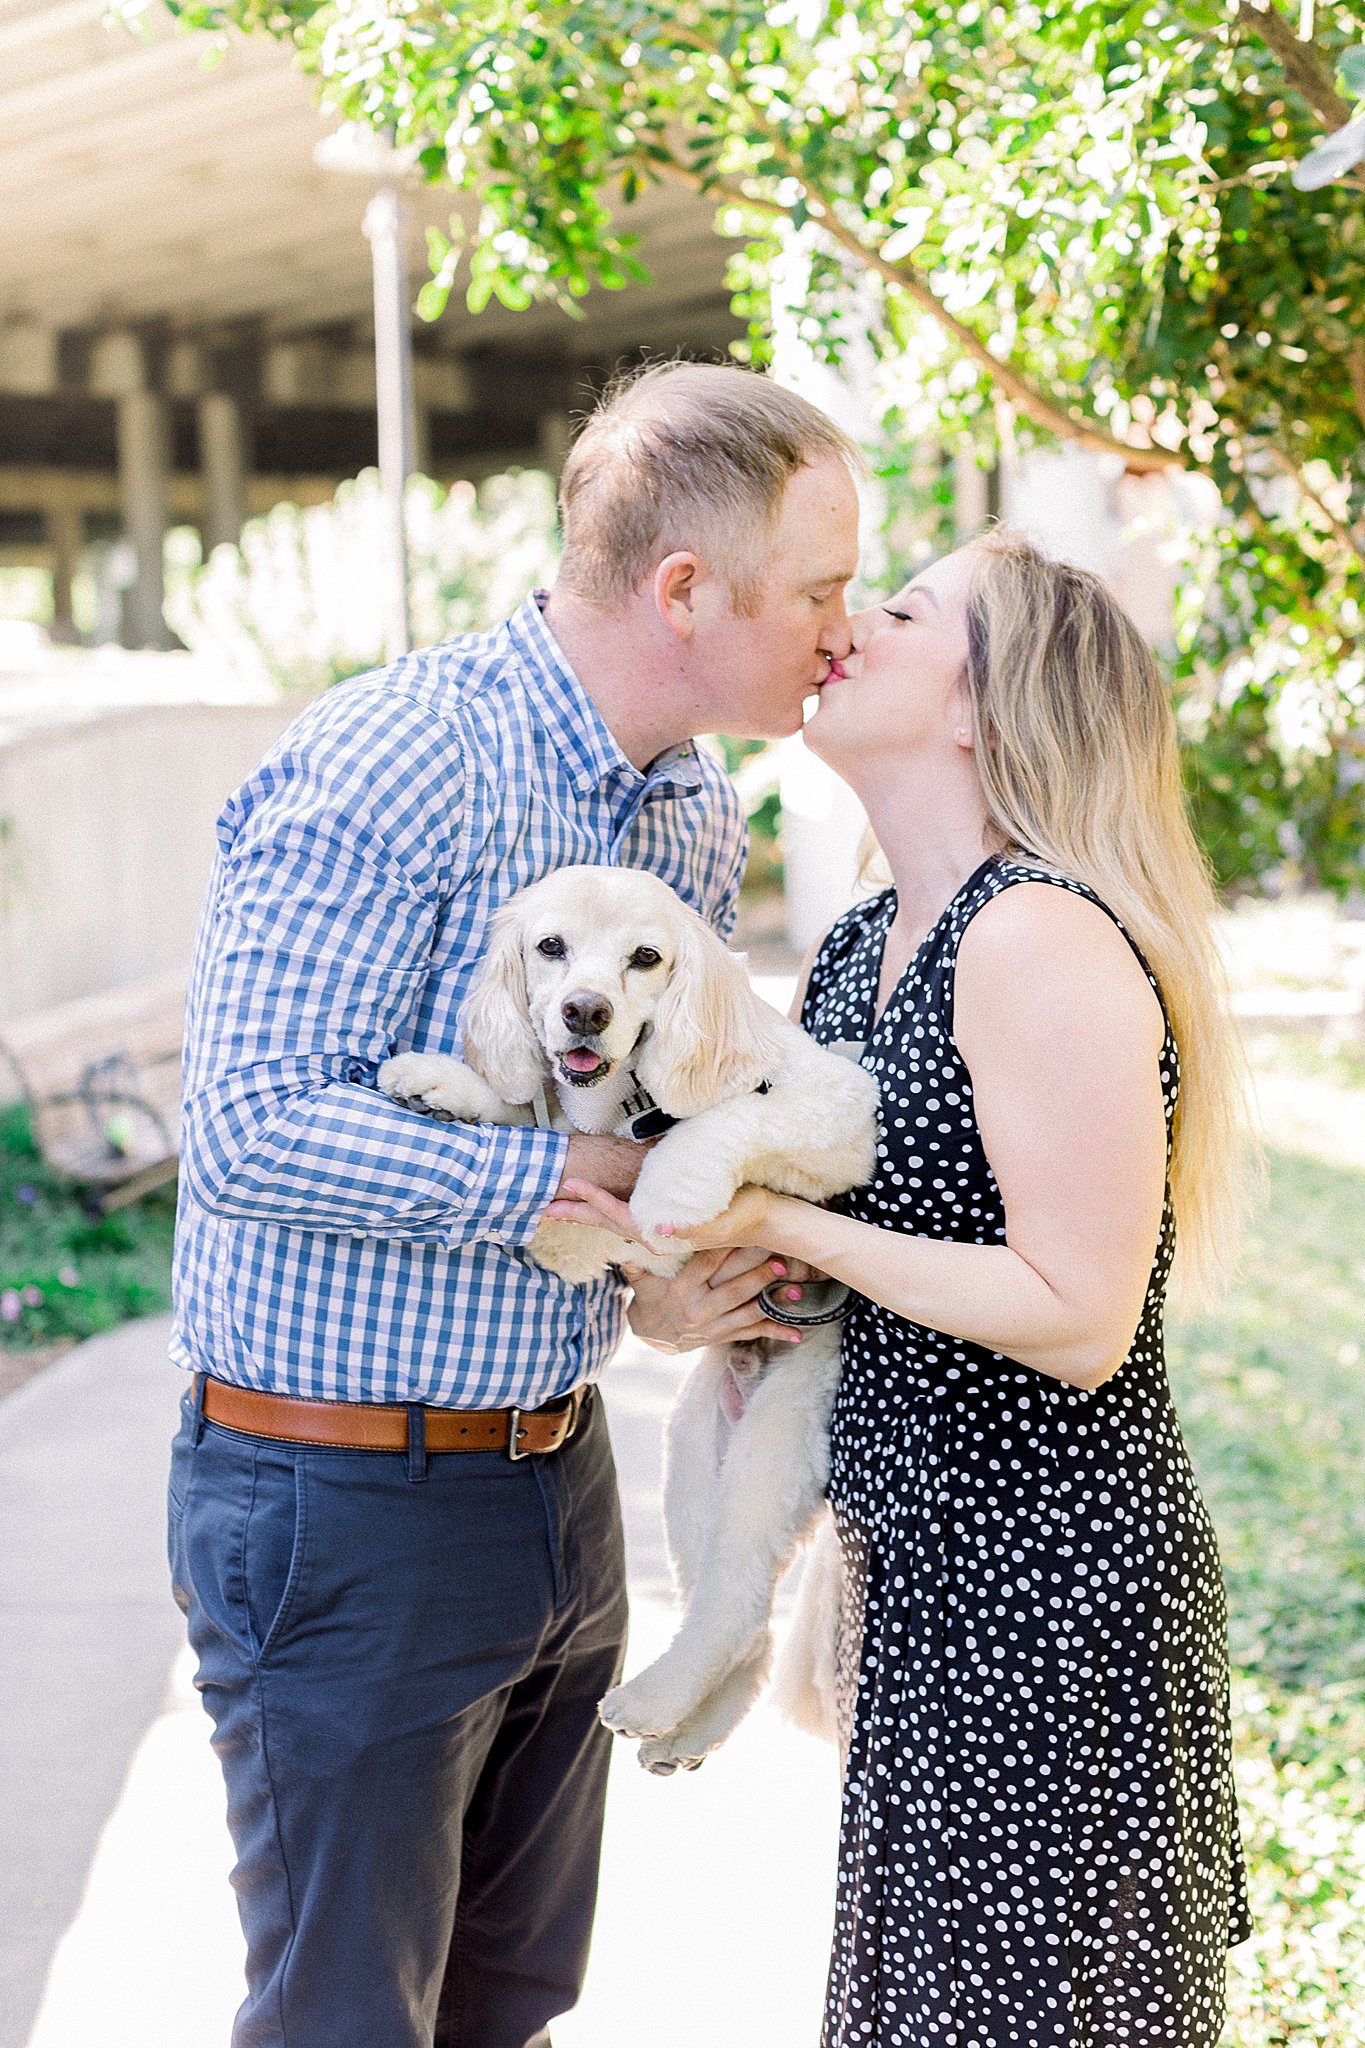 Engagement Session with Puppy-Anna Kay Photography, Texas Wedding Photographer